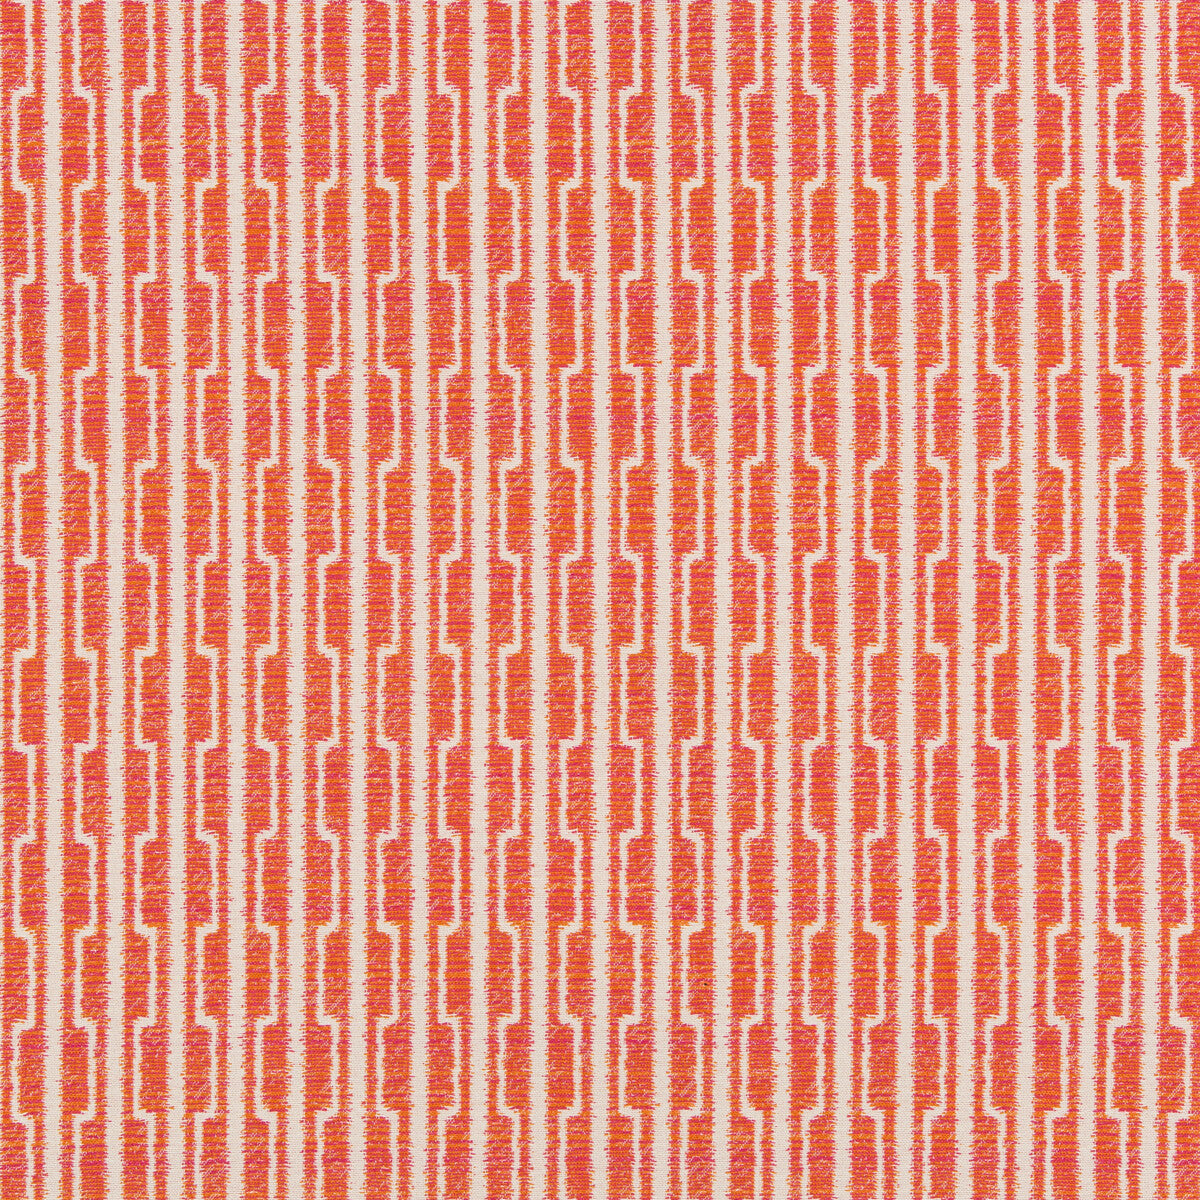 Kravet Design fabric in 36084-712 color - pattern 36084.712.0 - by Kravet Design in the Inside Out Performance Fabrics collection